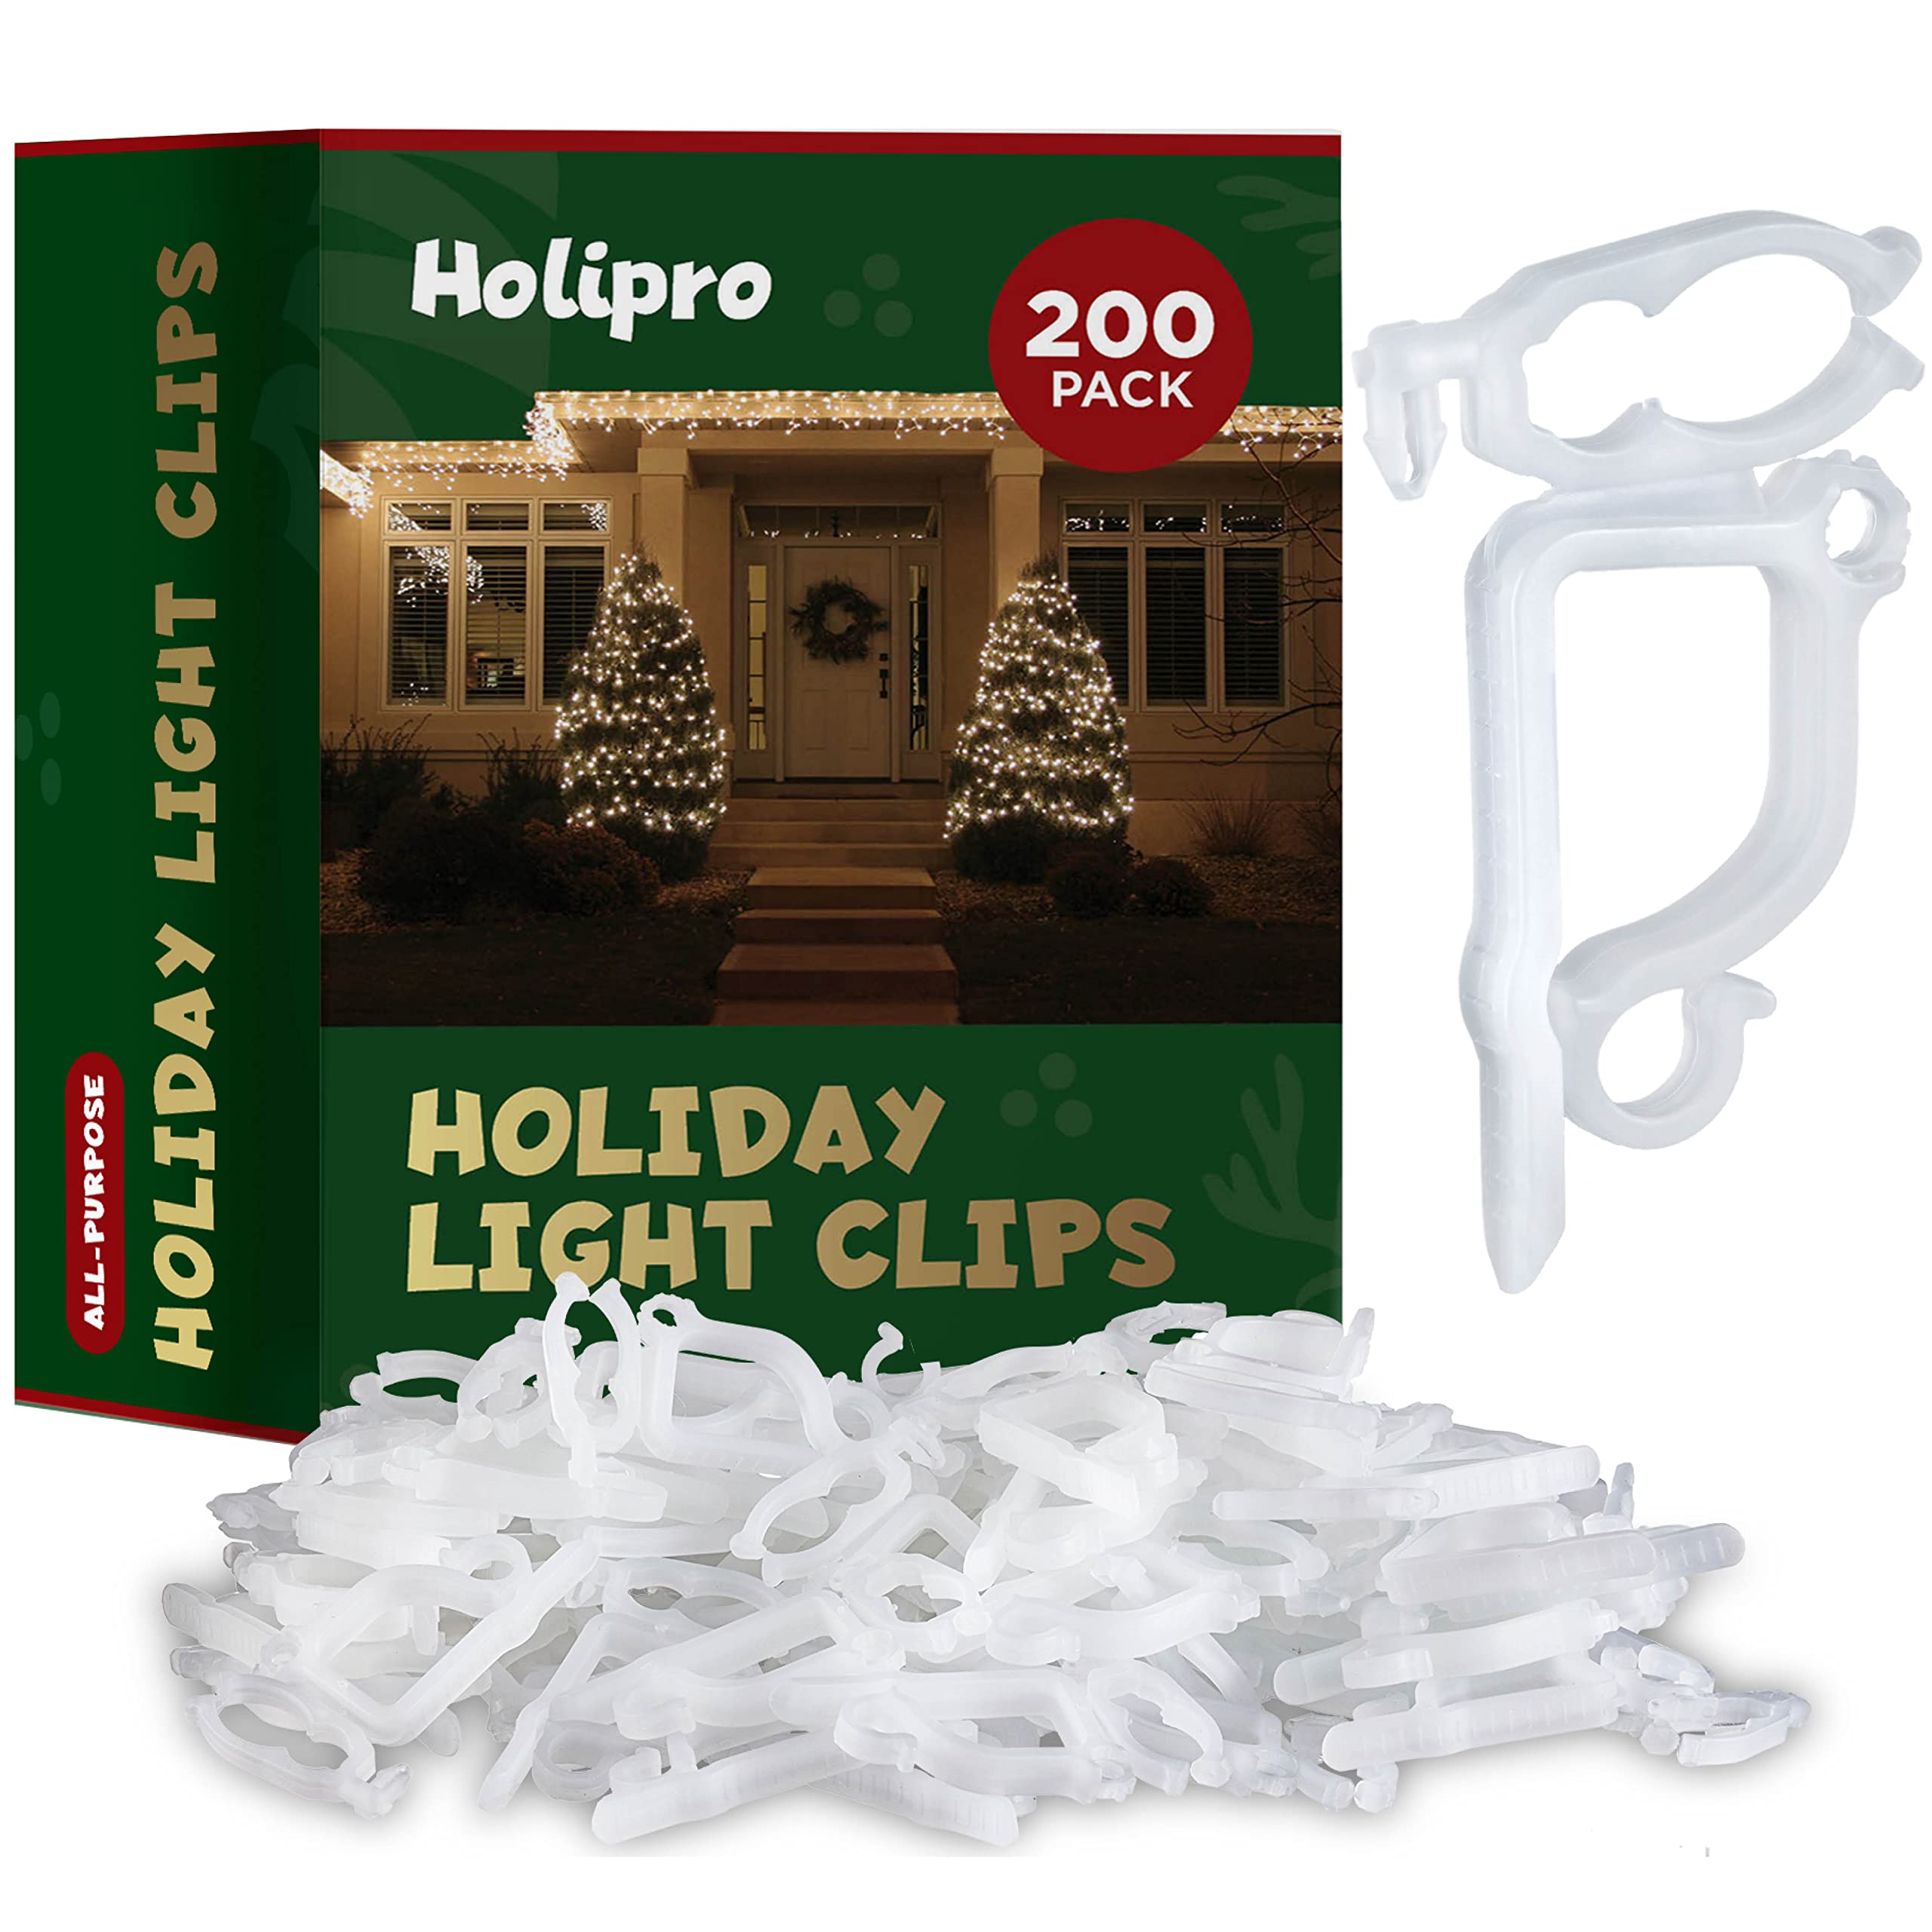 All-Purpose Holiday Light Clips [Set of 200] Christmas Light Clips, Outdoor Light Clips - Mount to Shingles & gutters - Works with Mini, C6, C7, C9, Rope, Icicle Lights - No Tools Required - USA Made  - Very Good